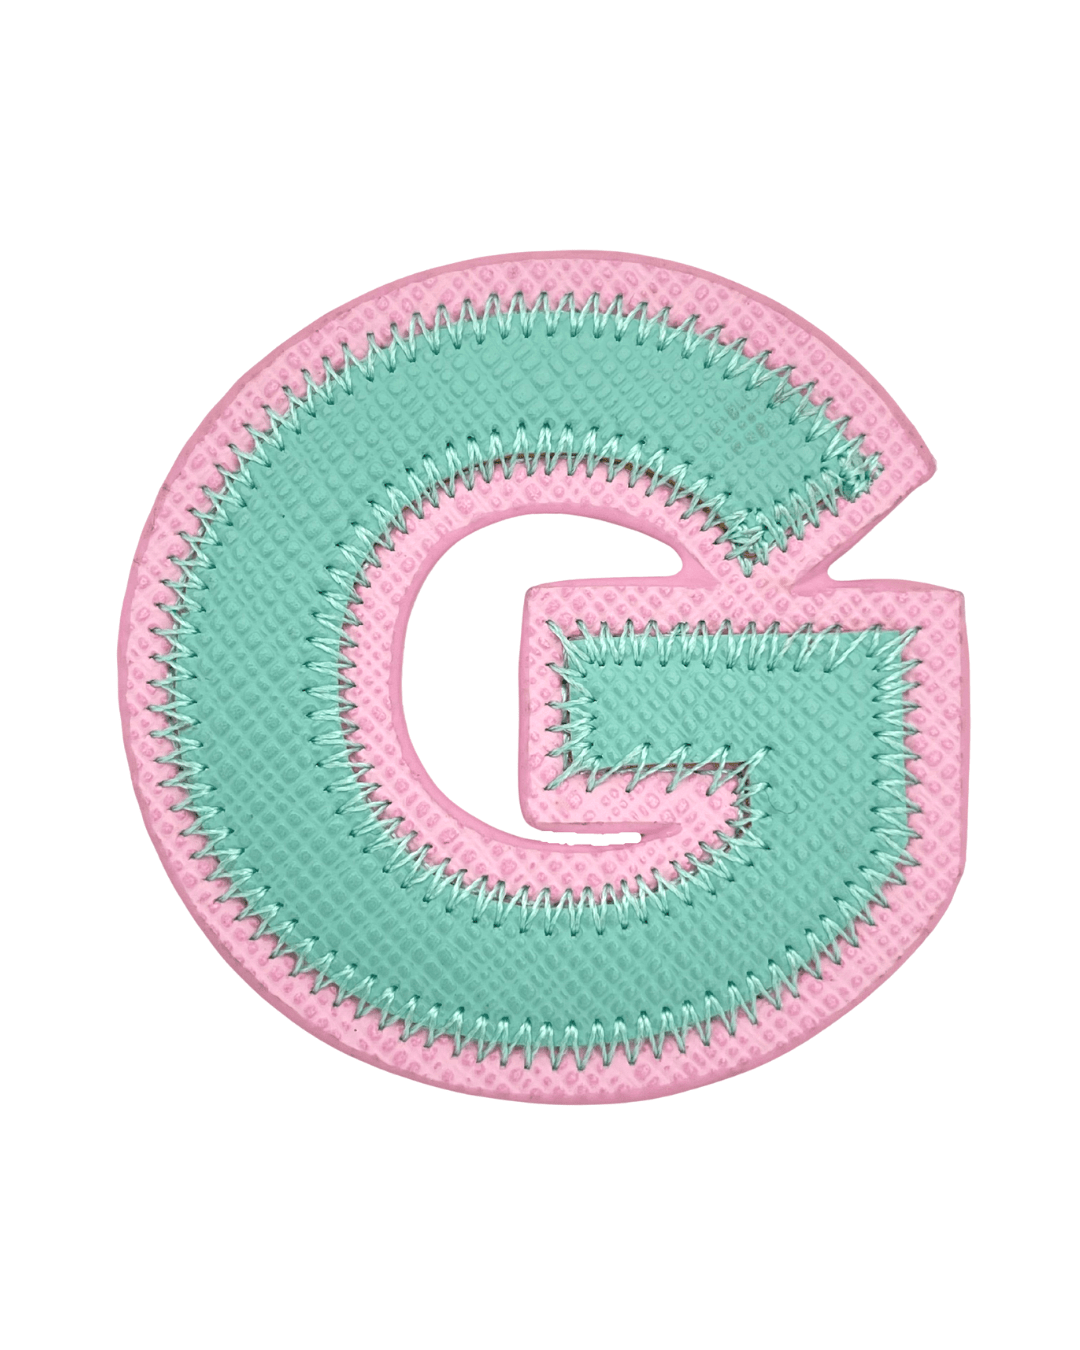 Turquoise + Pink Vegan Leather Letter Patches - American Deadstock